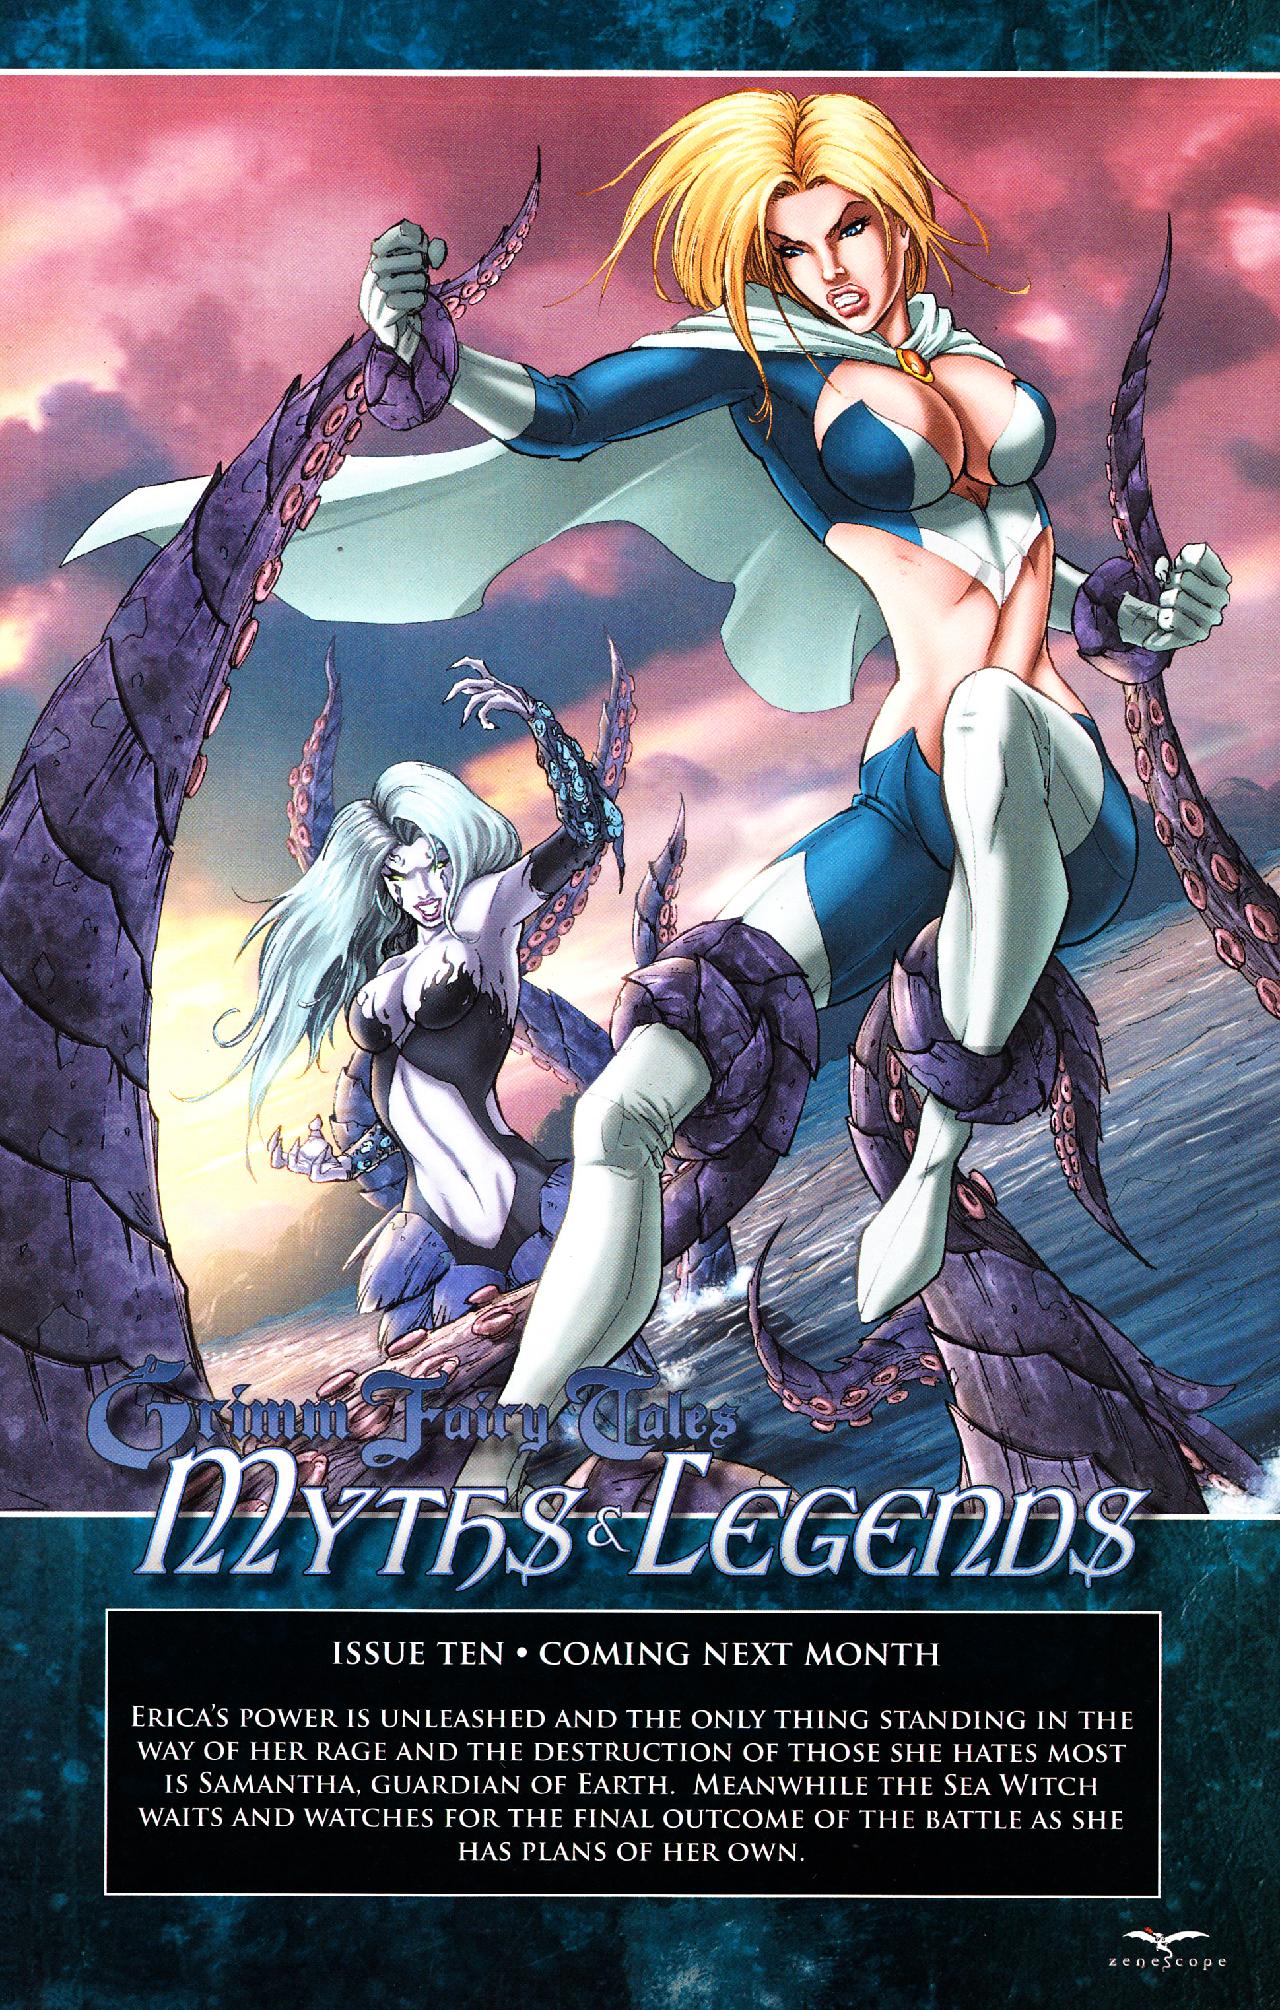 Read online Grimm Fairy Tales: Myths & Legends comic -  Issue #9 - 28